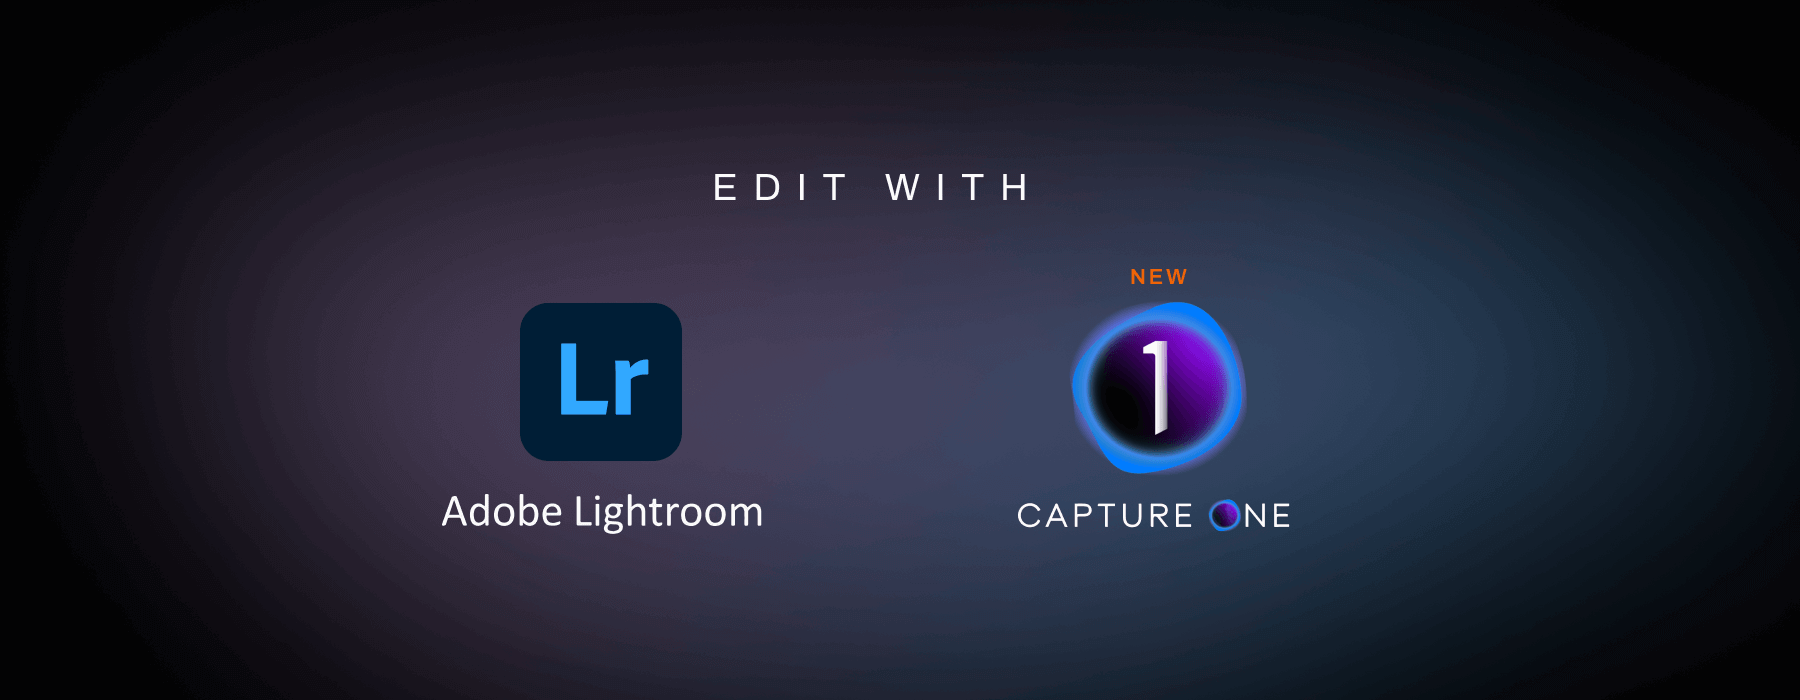 Aftershoot EDITS works with Capture One and Lightroom